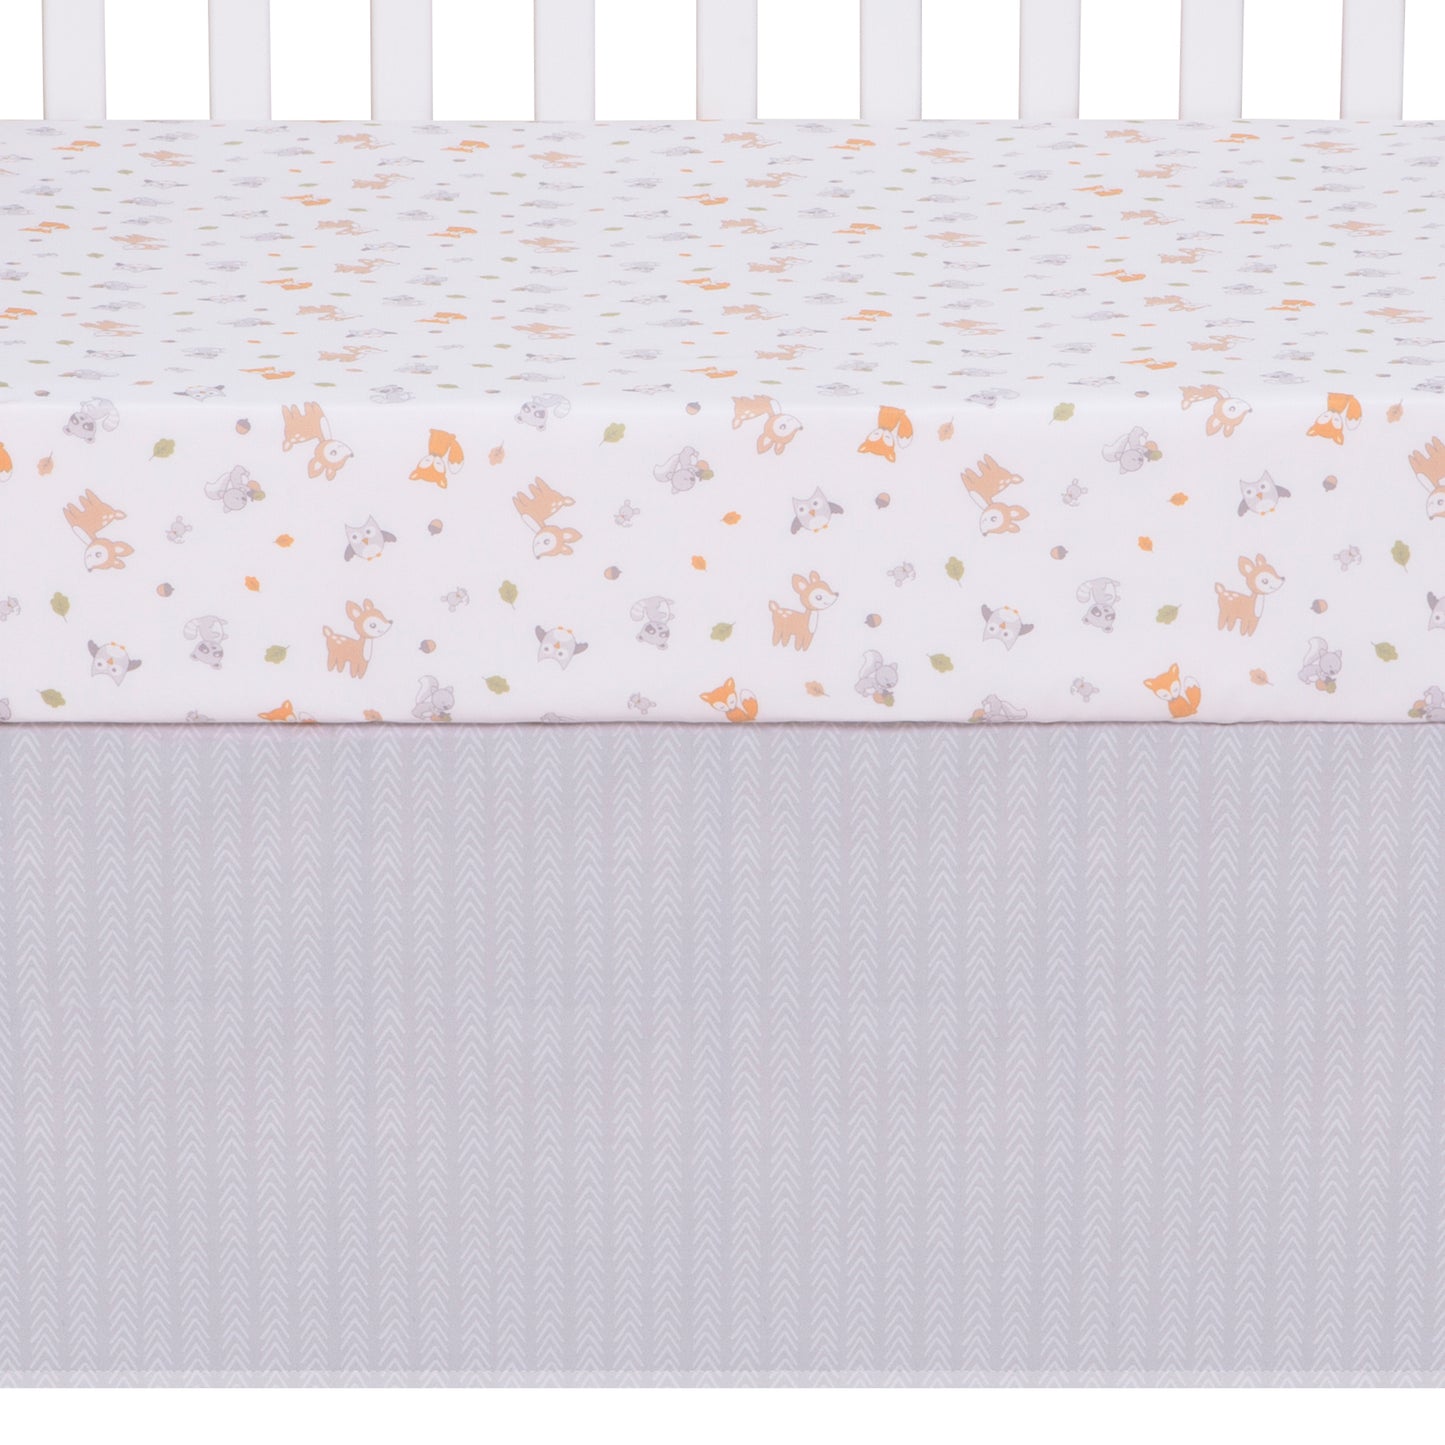 Friendly Forest 4 Piece Crib Bedding Collection by Sammy & Lou®; crib sheet and crib skirt. Crib skirt features a simple coordinating herringbone print.